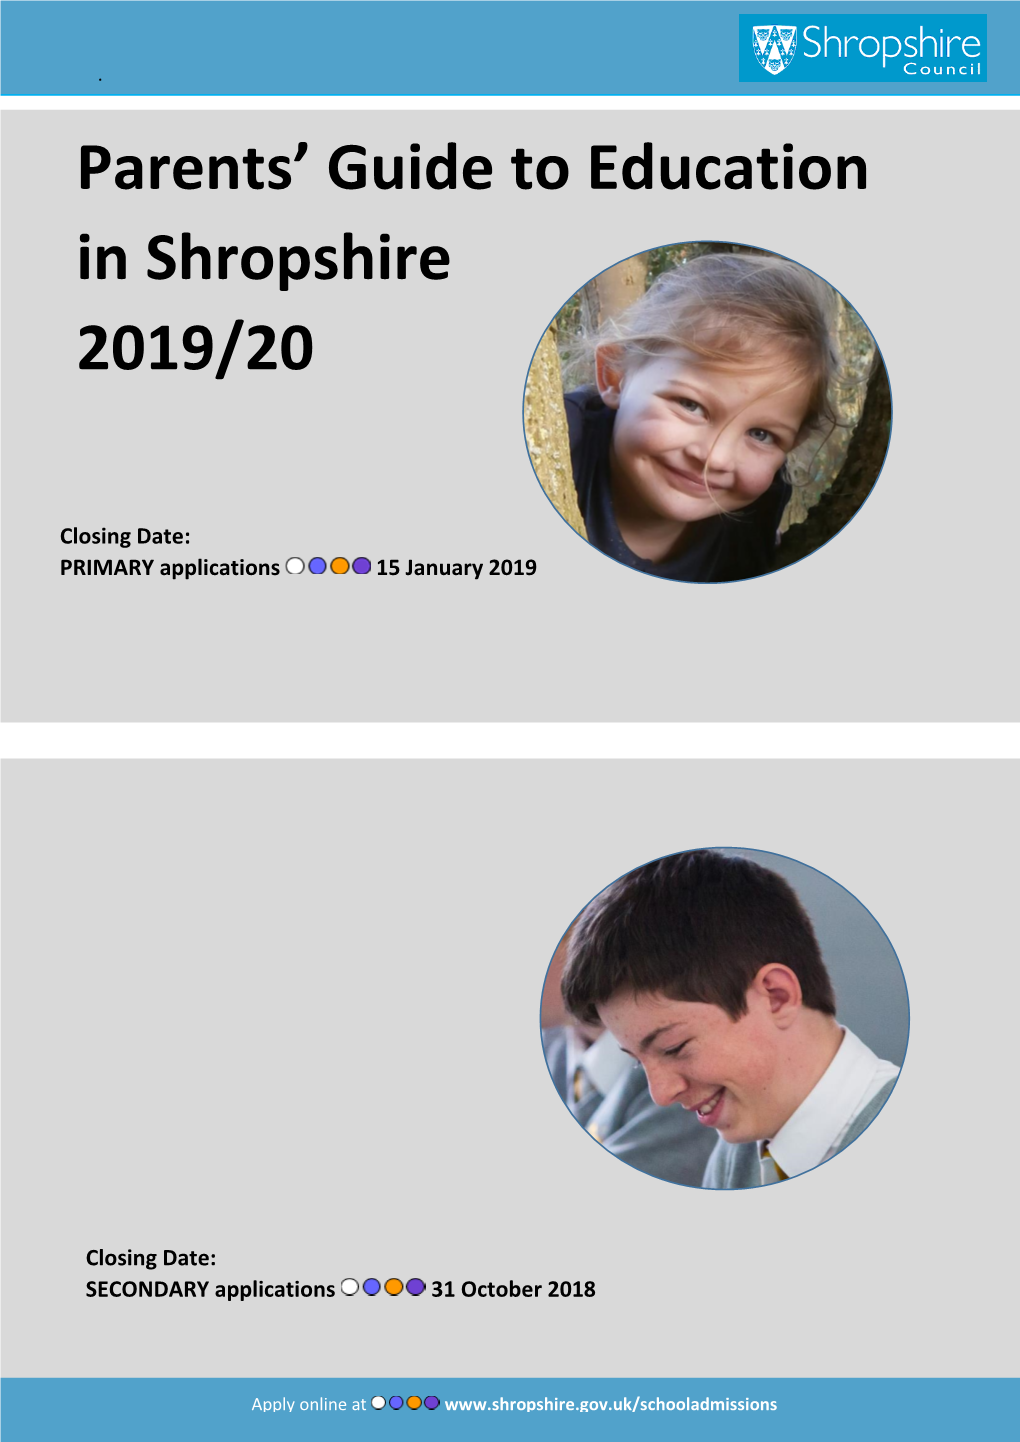 Parents' Guide to Education in Shropshire 2019/20